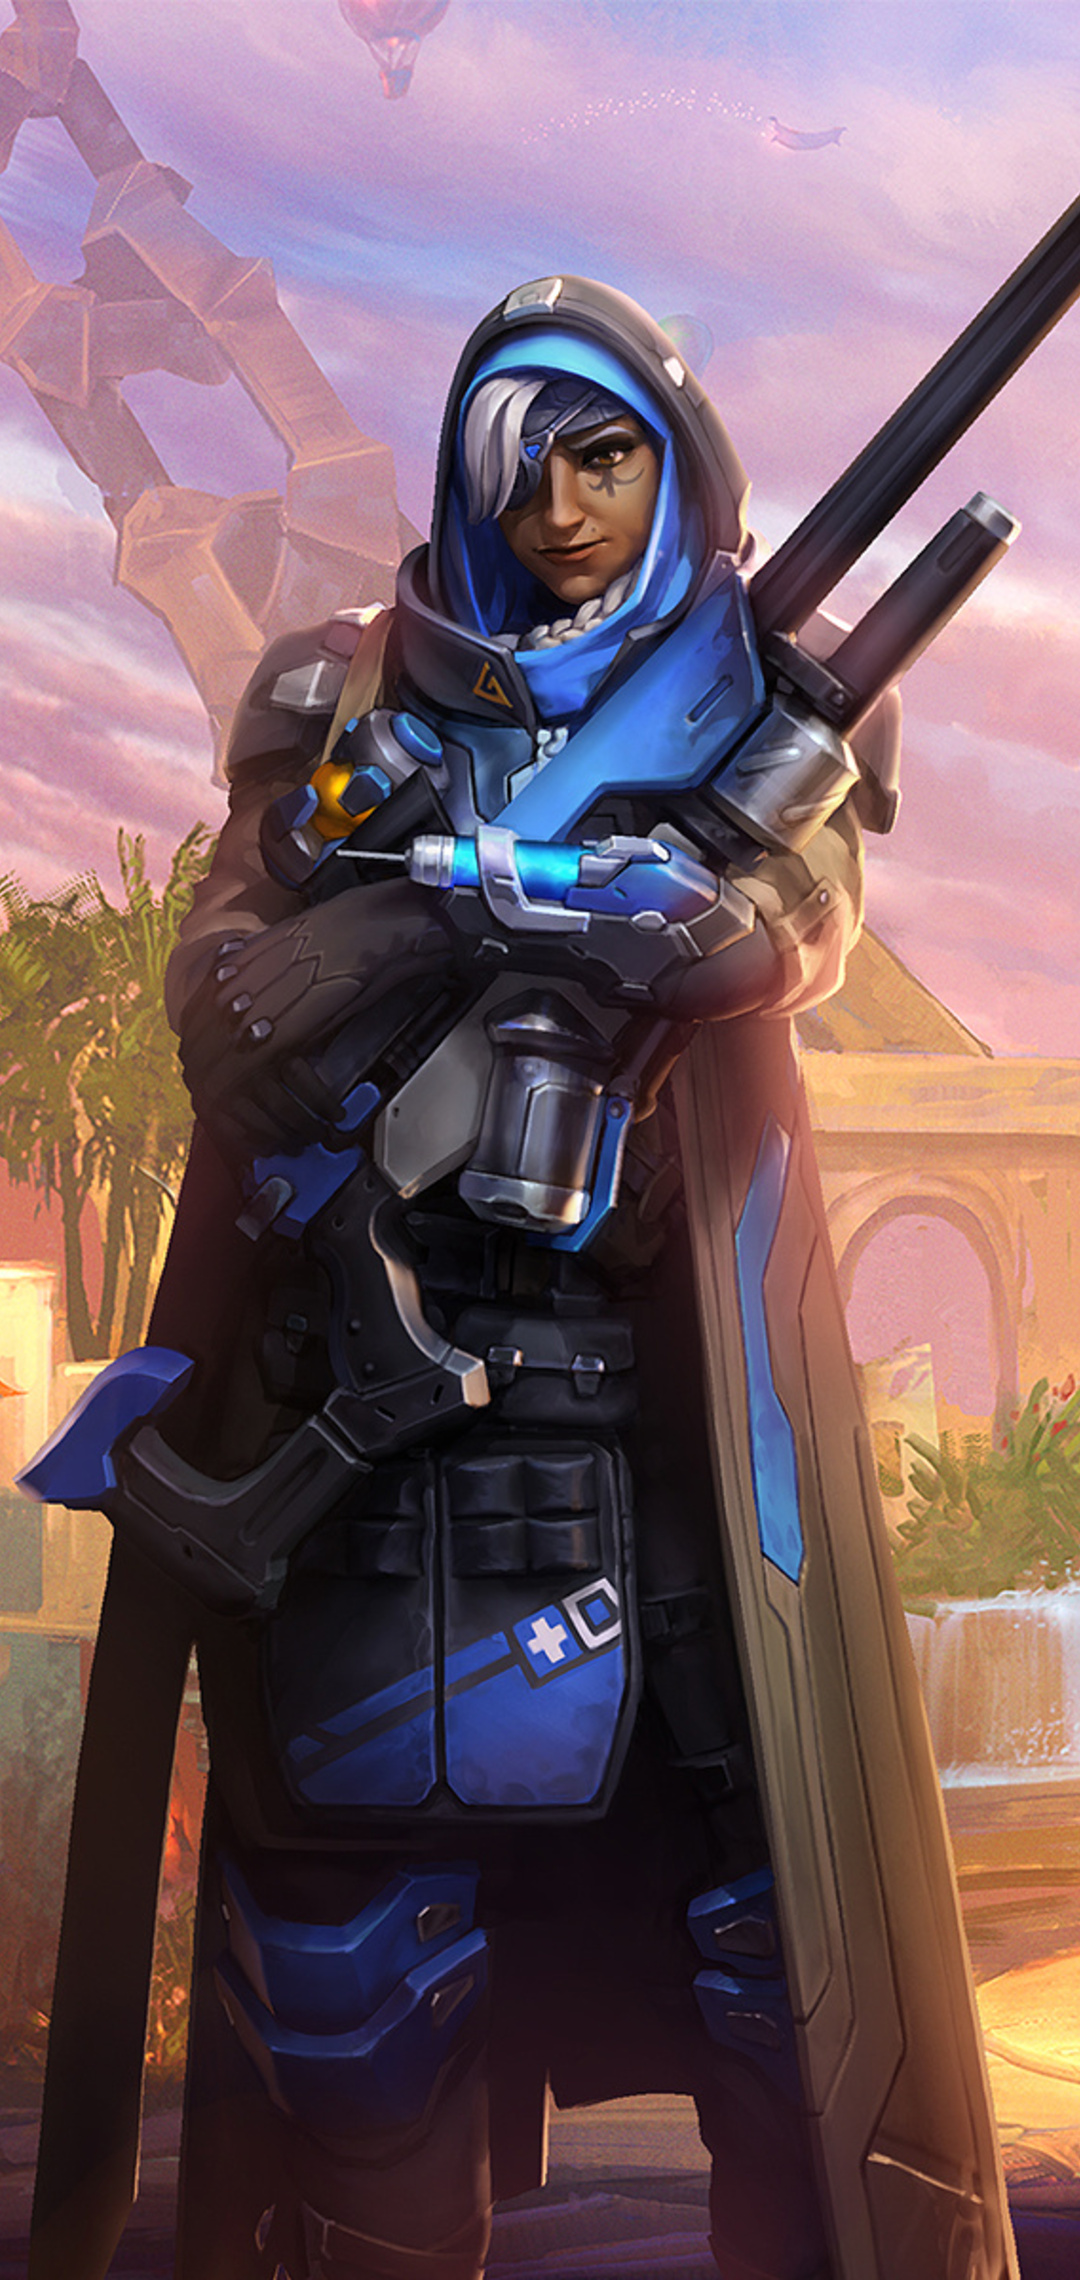 1080x2280 Ana Overwatch Sniper One Plus 6 Huawei P Honor View 10 Vivo Y85 Oppo F7 Xiaomi Mi Hd 4k Wallpapers Images Backgrounds Photos And Pictures